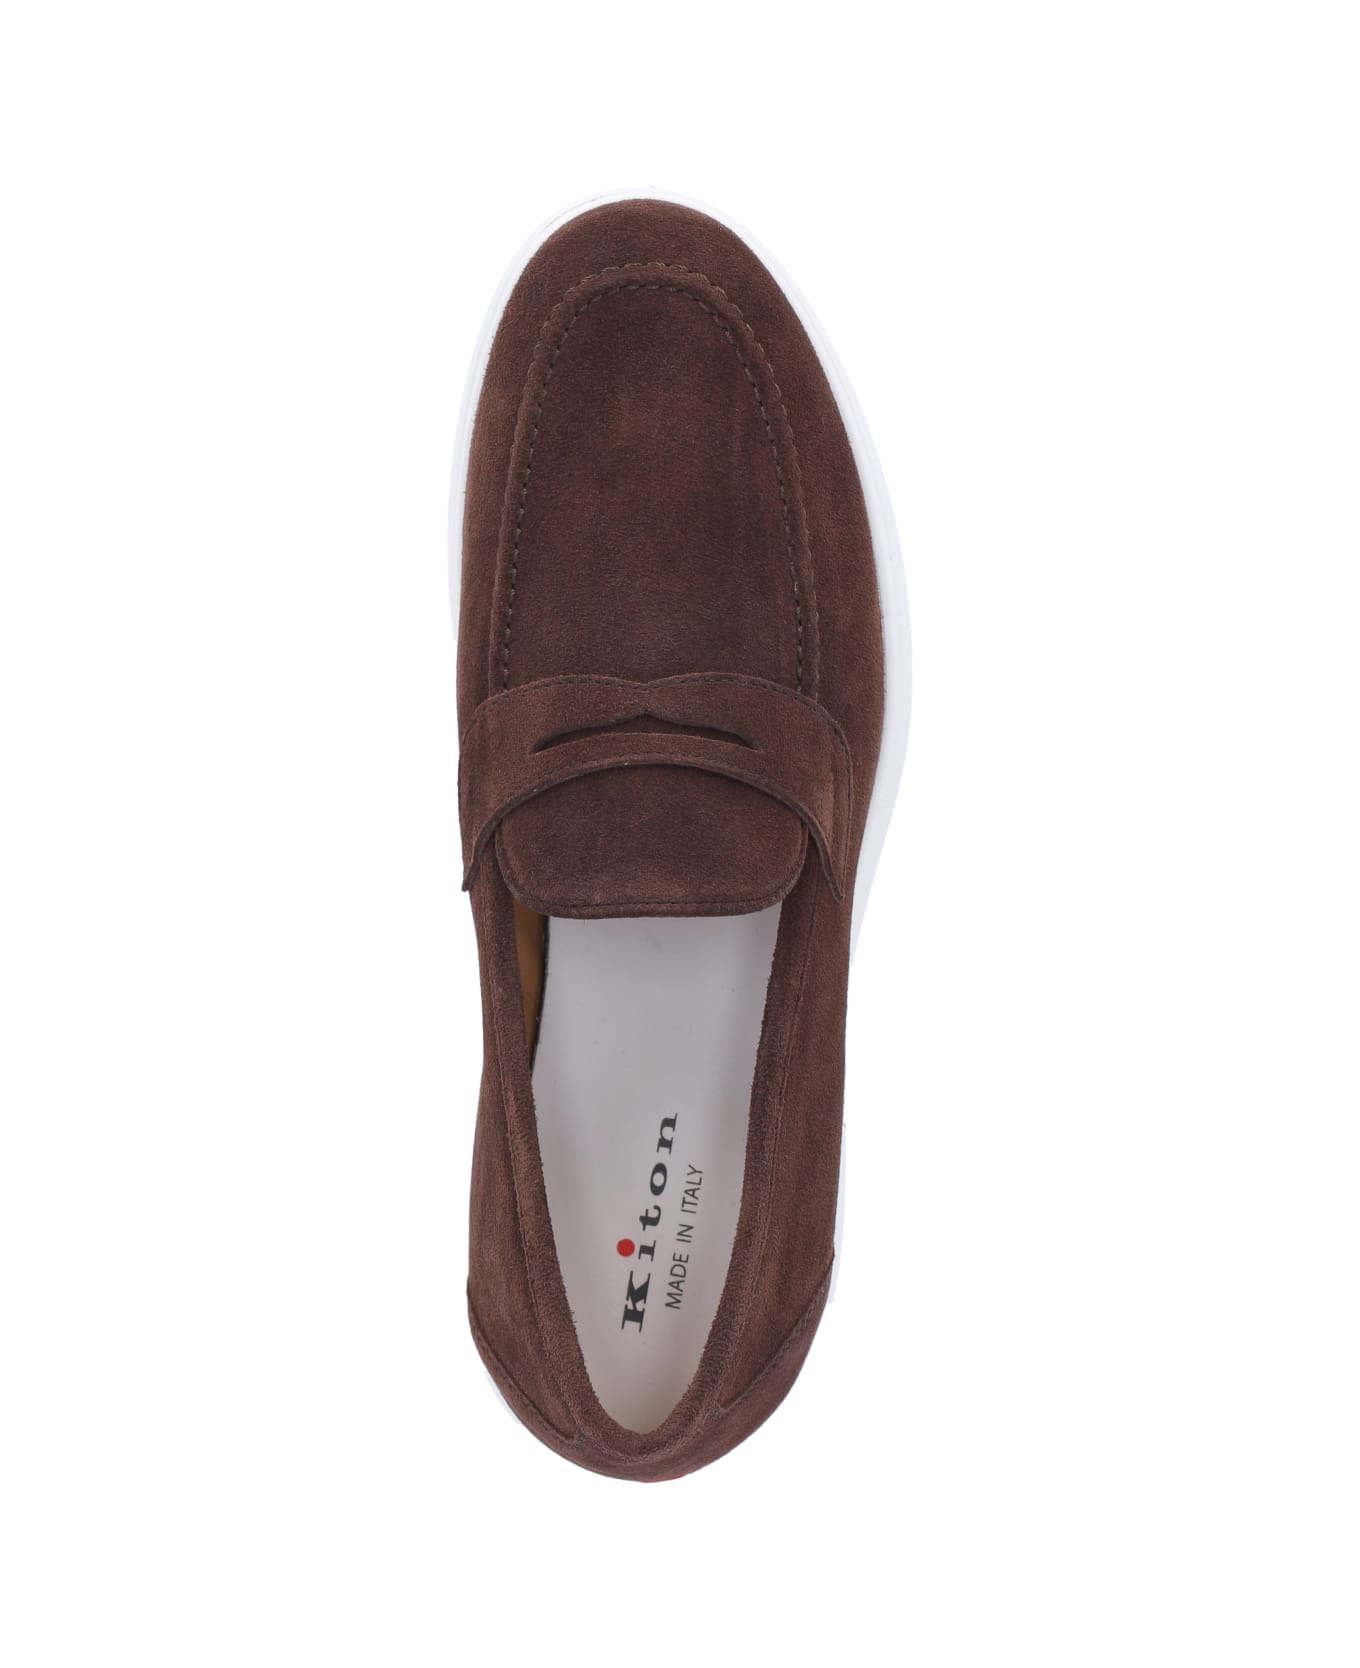 Kiton Suede Loafers - Brown